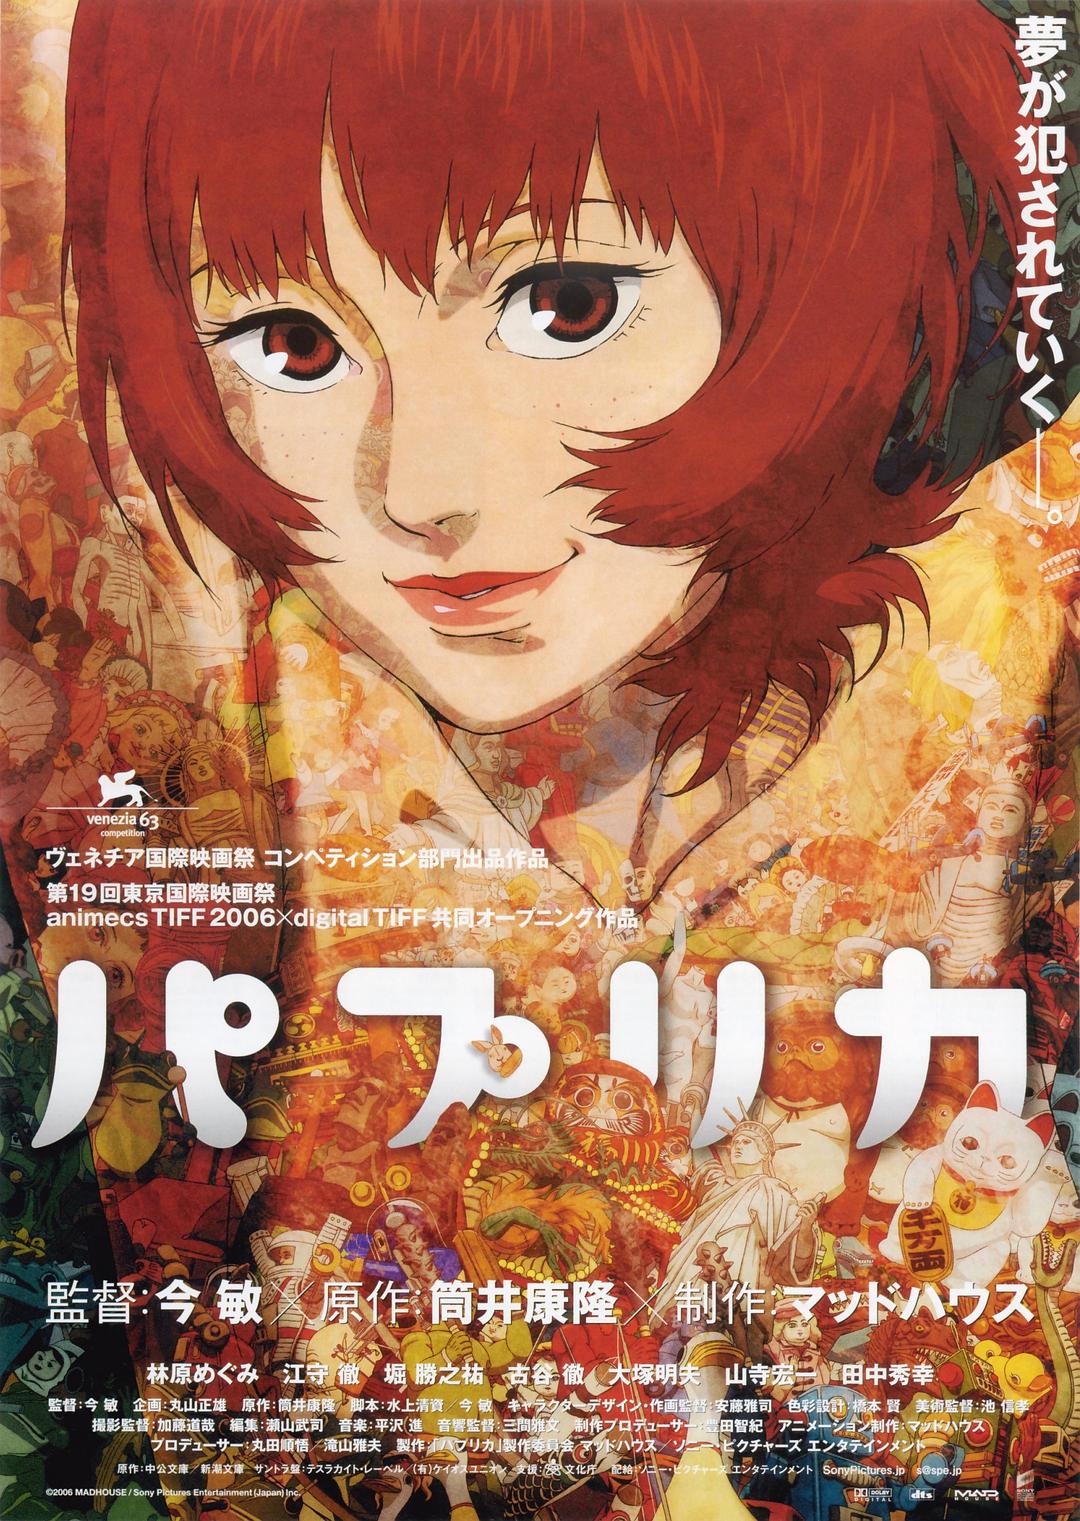  Paprika.2006.JAPANESE.1080p.BluRay.x264.DTS-FGT 9.16GB-1.png